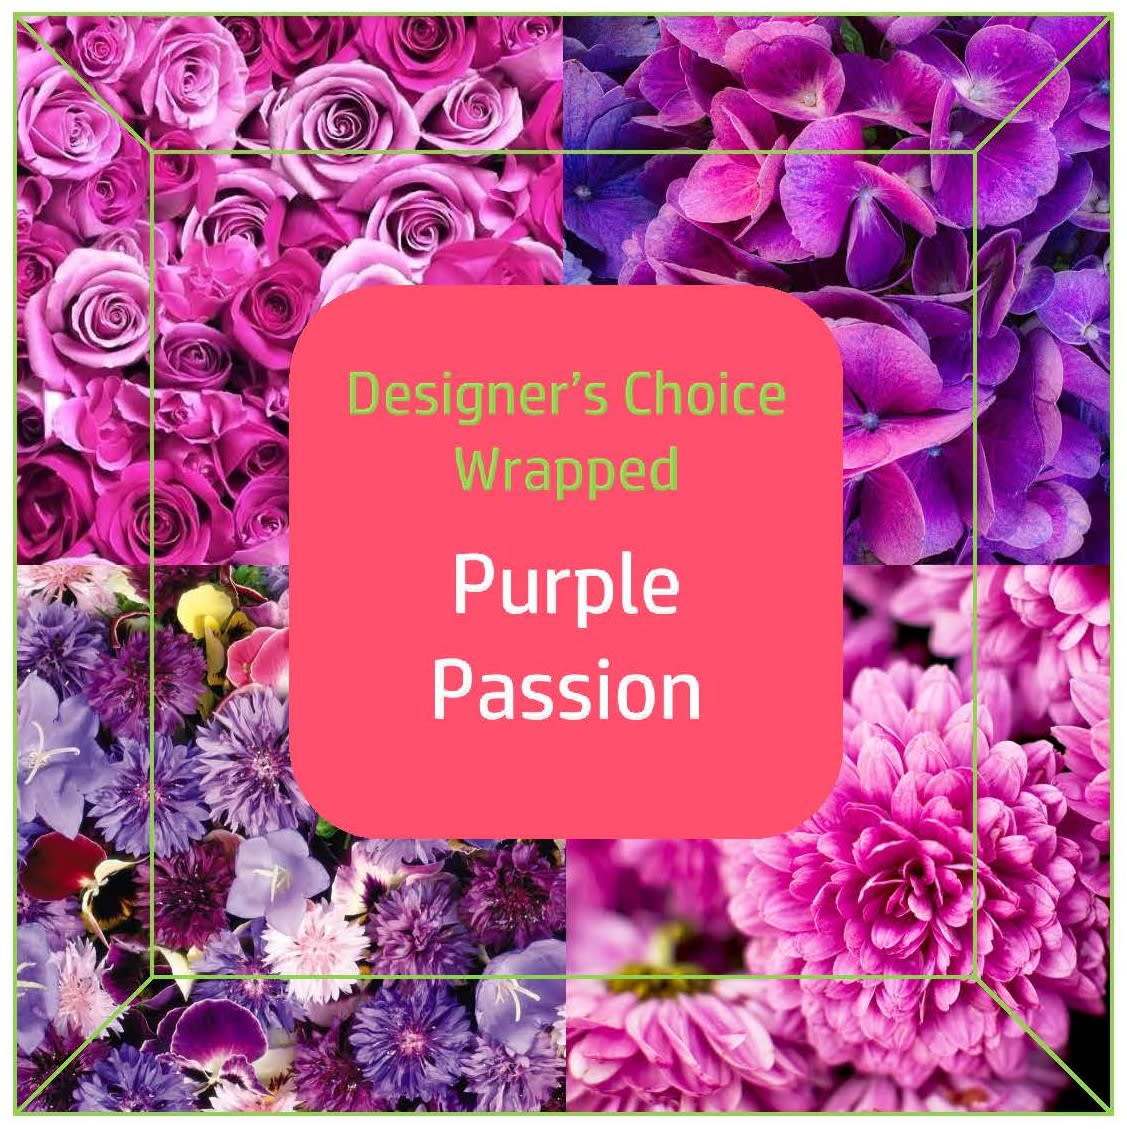 Designer's Choice (Wrapped) Purple Passion - Share your passion of purple by sending a made-on-the-spot wrapped floral bouquet! Our expert designer will hand-select the freshest of our seasonal blooms and design them into a beautiful wrapped bouquet, all tied together with a lovely bow! (NO VASE) Sizes and colors will vary. If you like a certain color more than another or you want us to avoid any type of flower, please leave a note in the special instructions.